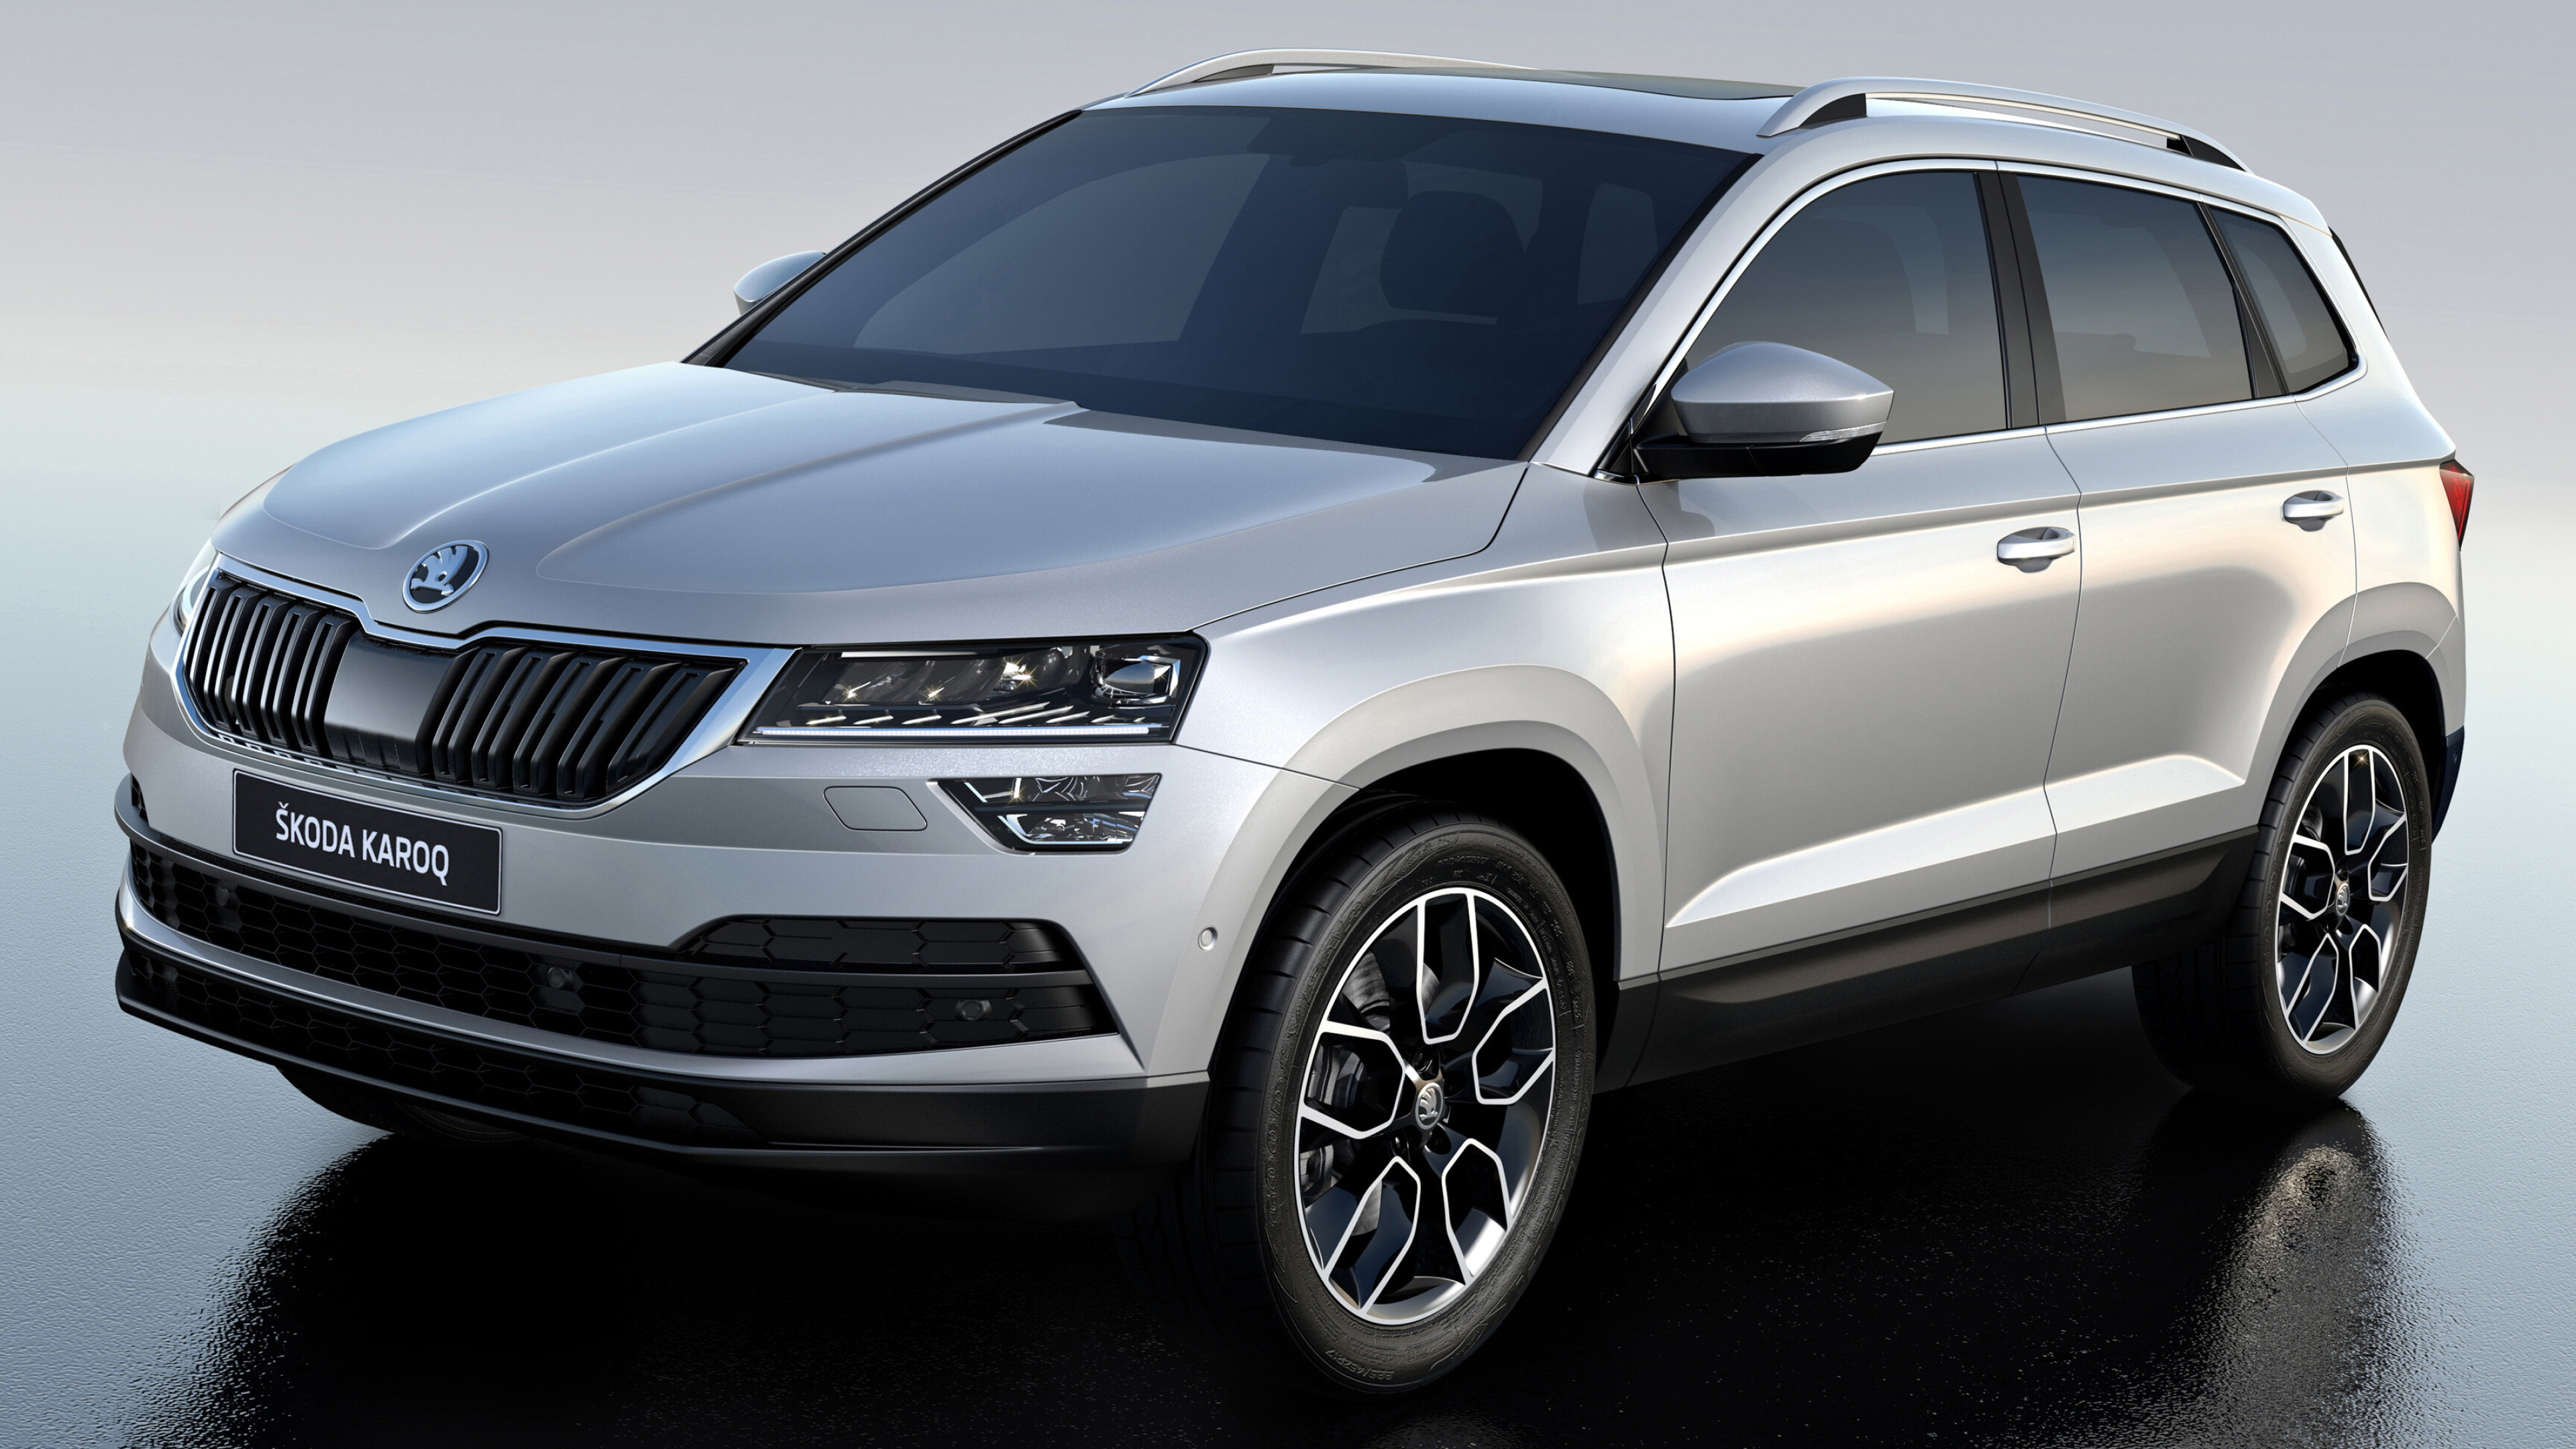 Skoda: Karoq, Introduced in 2017, the vehicle is based on the Volkswagen Group MQB platform. 3840x2160 4K Wallpaper.